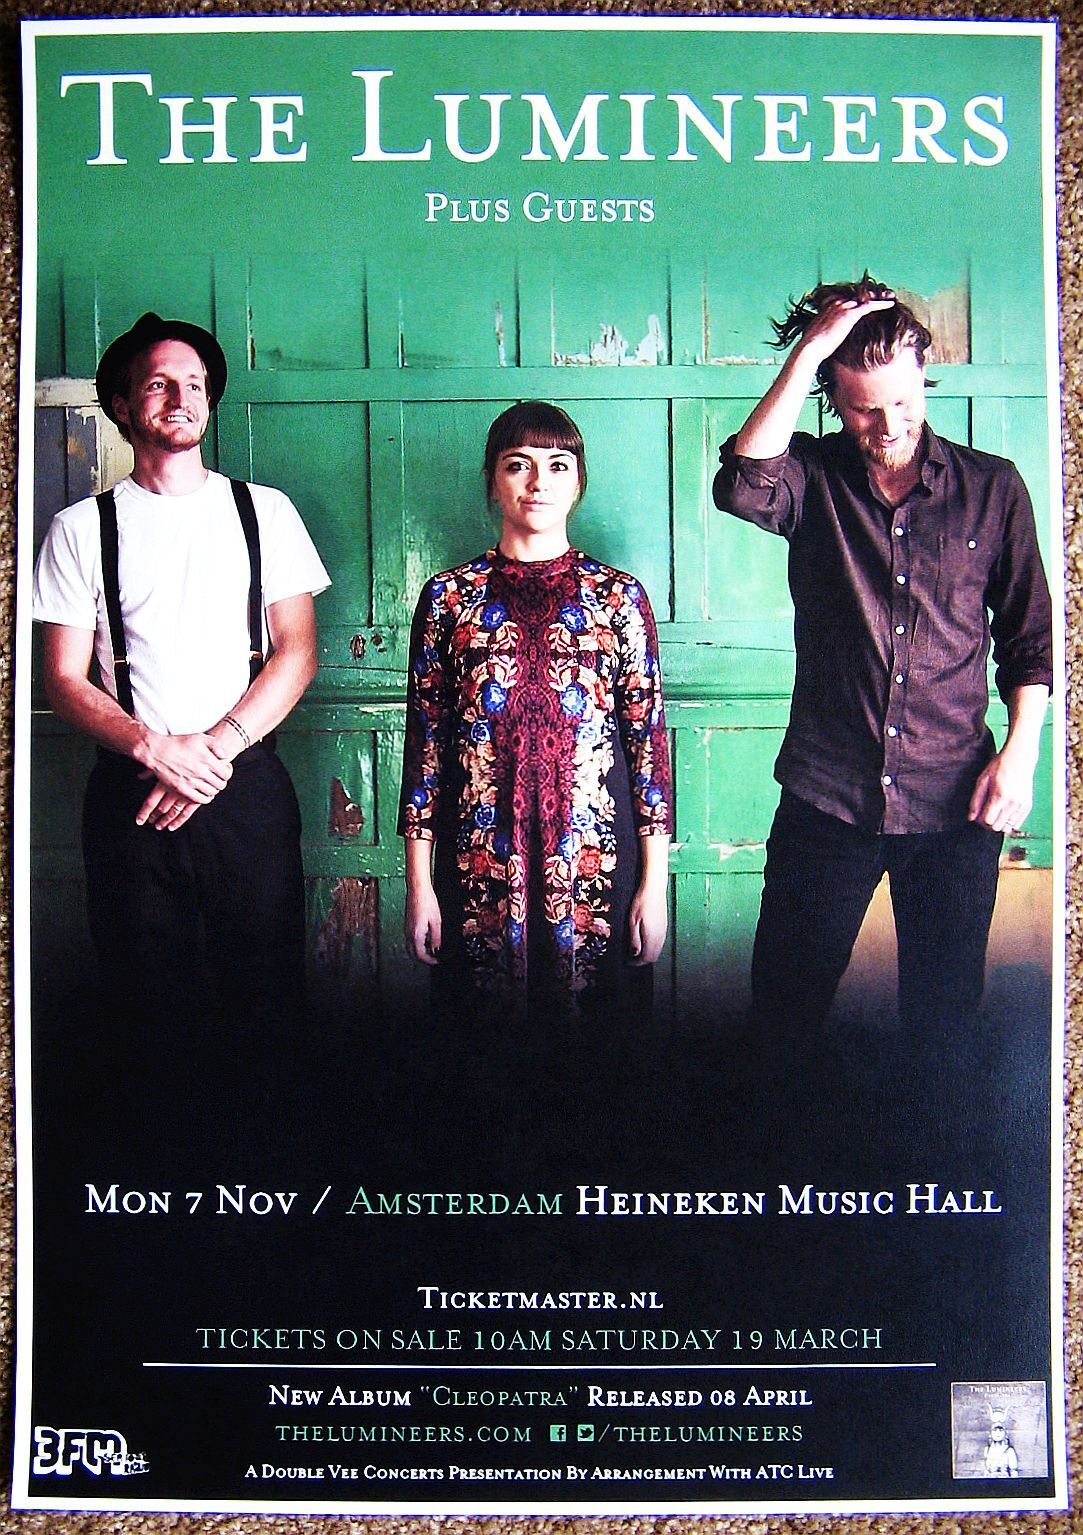 THE LUMINEERS 2016 Gig POSTER Amsterdam Netherlands Concert